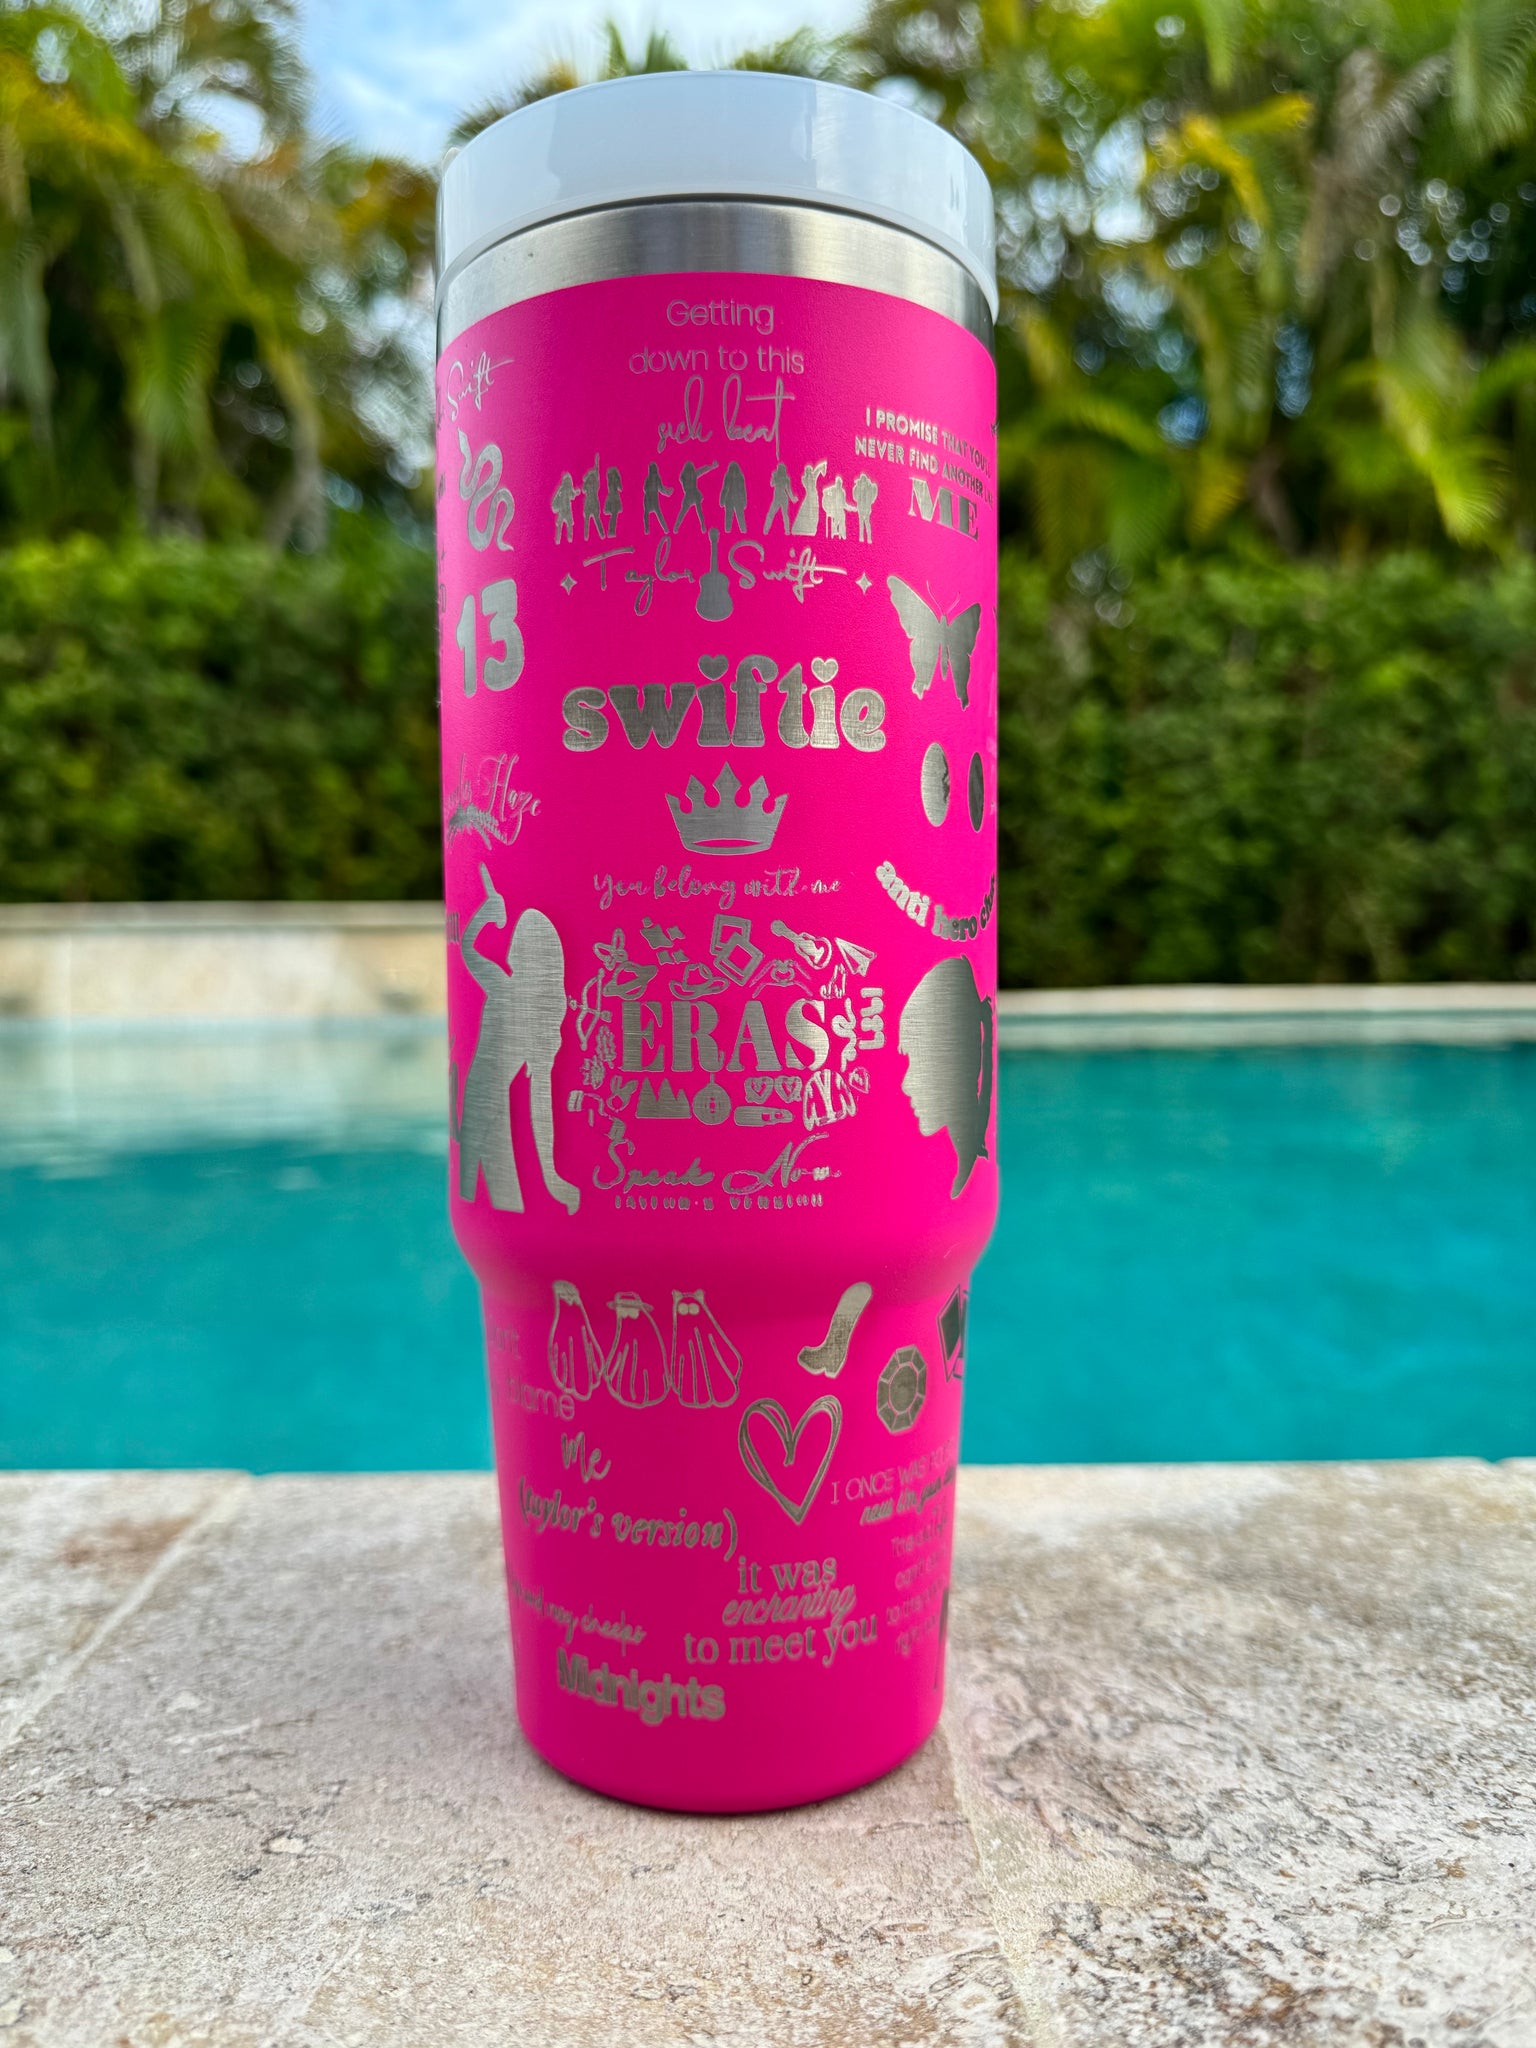 New Taylor Swift design! Only 2 30oz cups left in stock! #stanleycup #, stanley tumbler